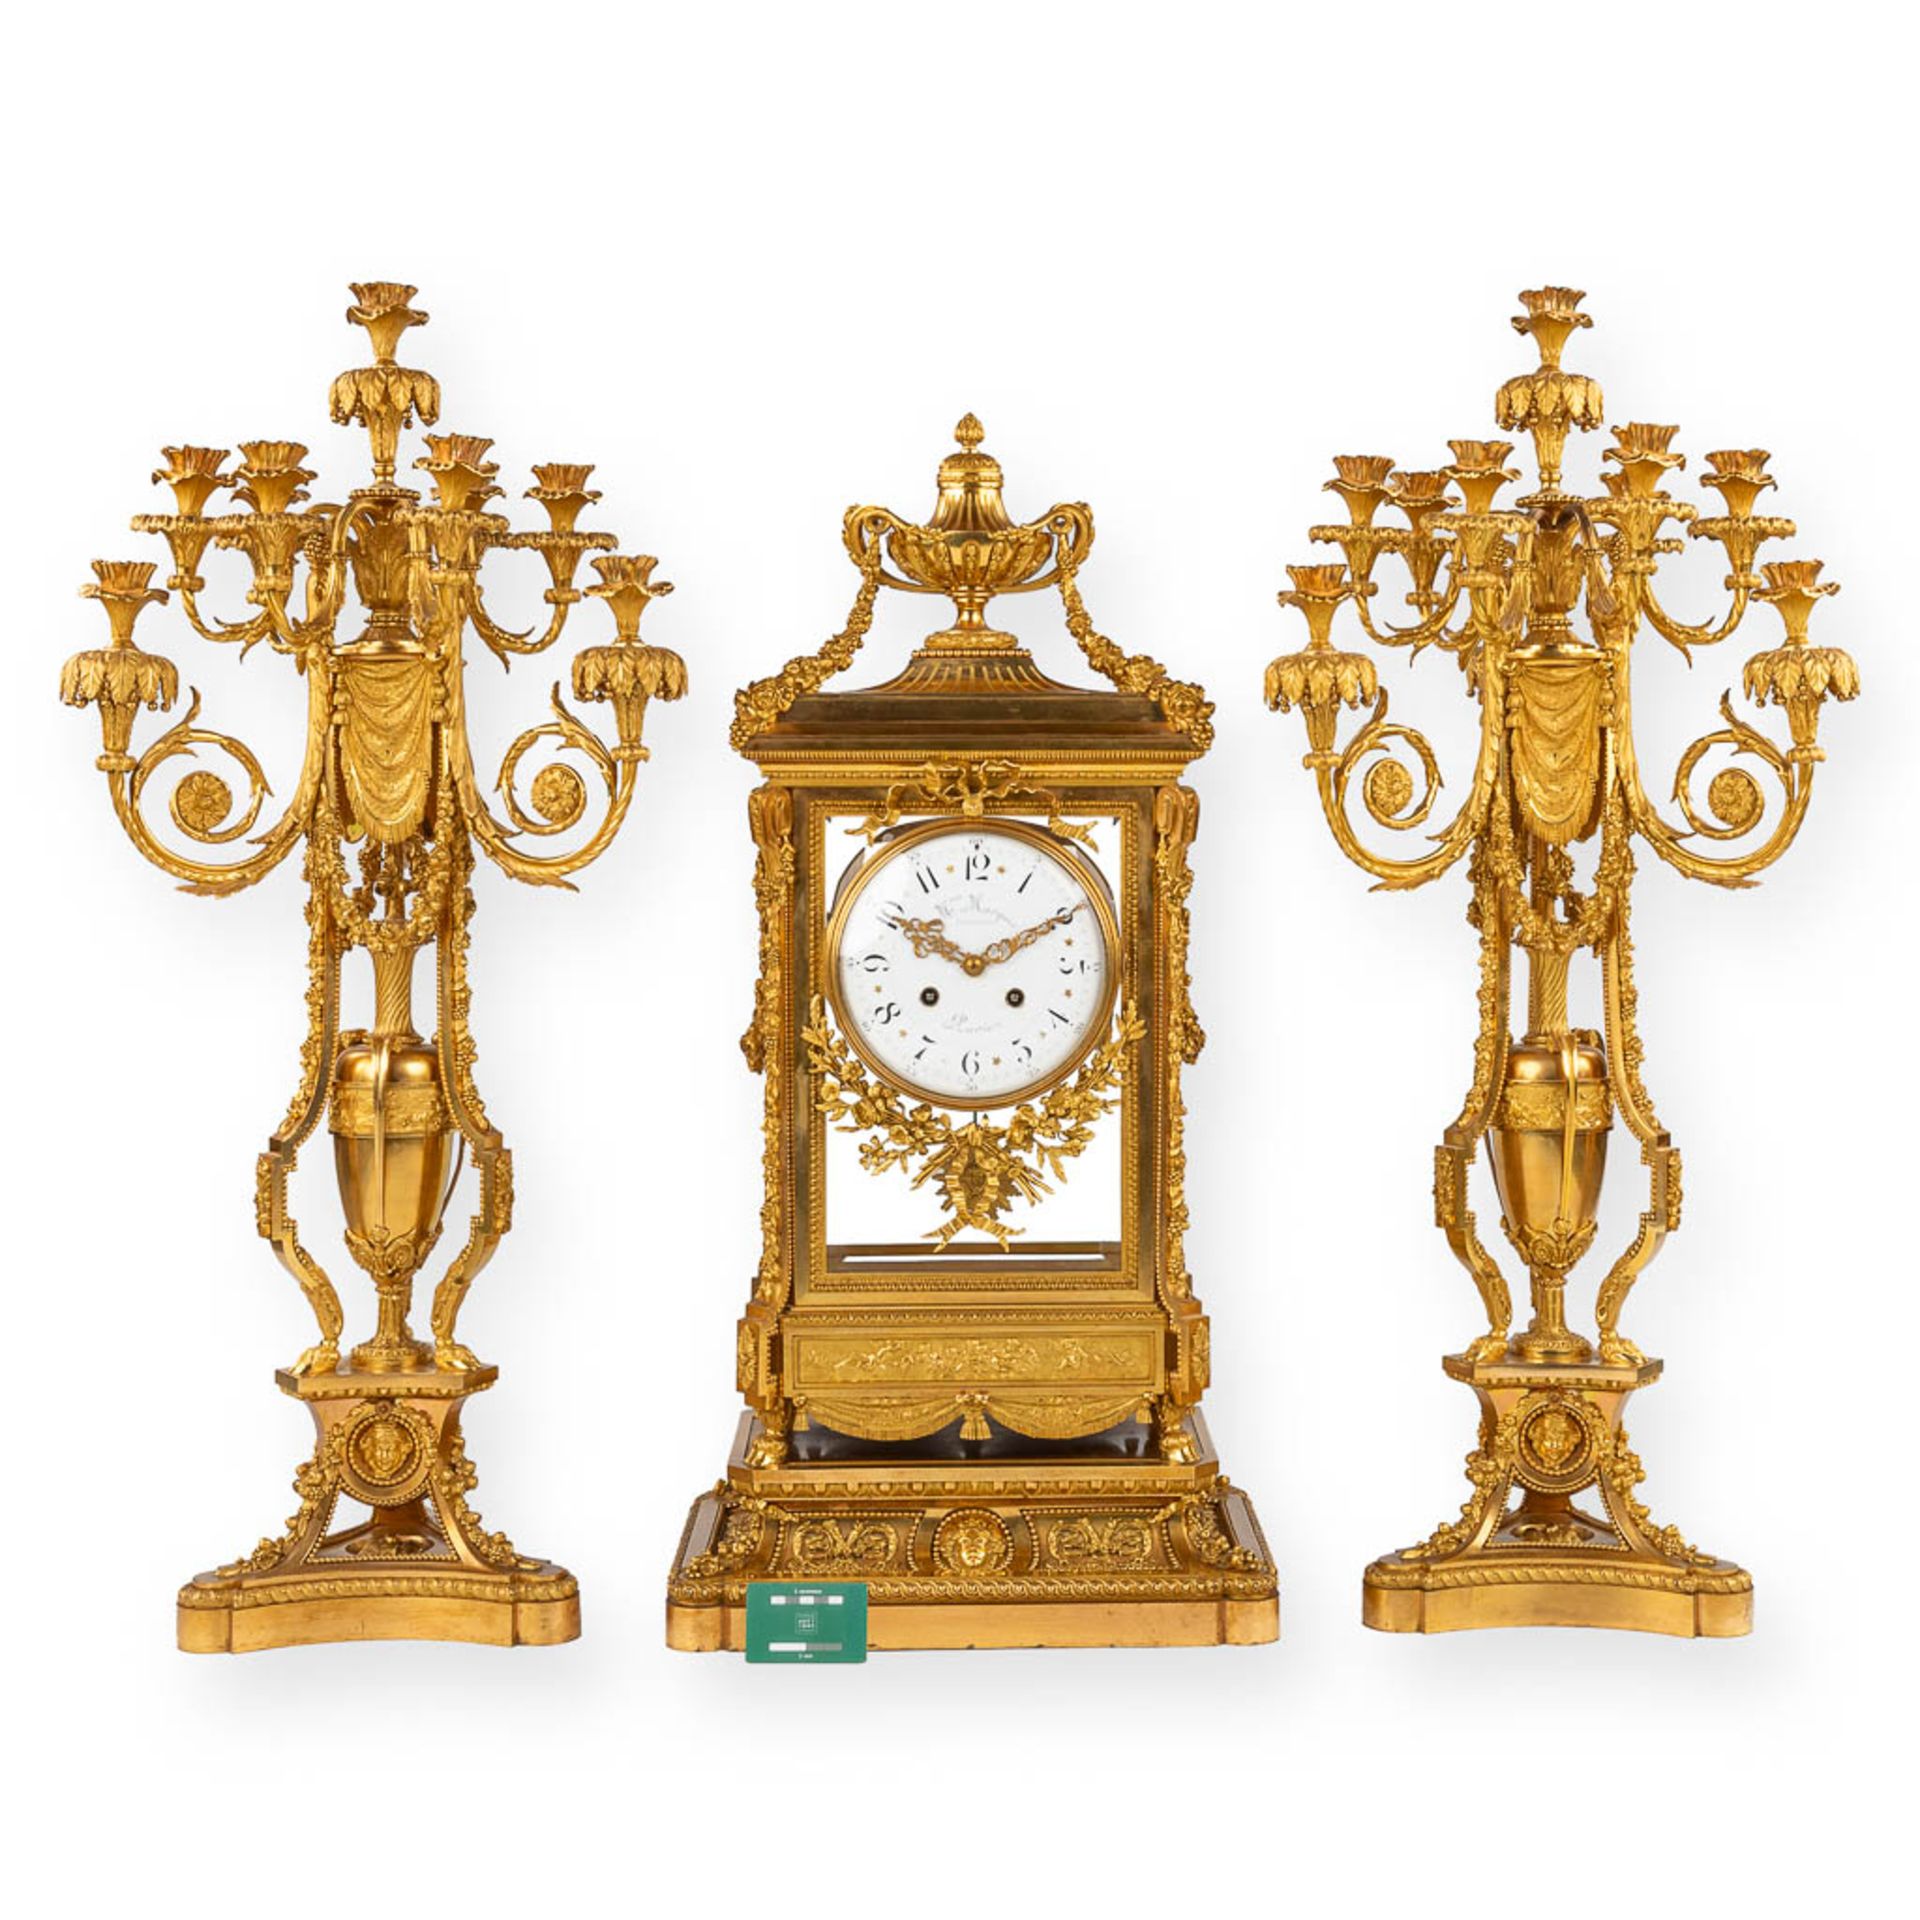 An imposing three-piece mantle garniture clock and candelabra, gilt bronze in Louis XVI style. Maiso - Image 2 of 38